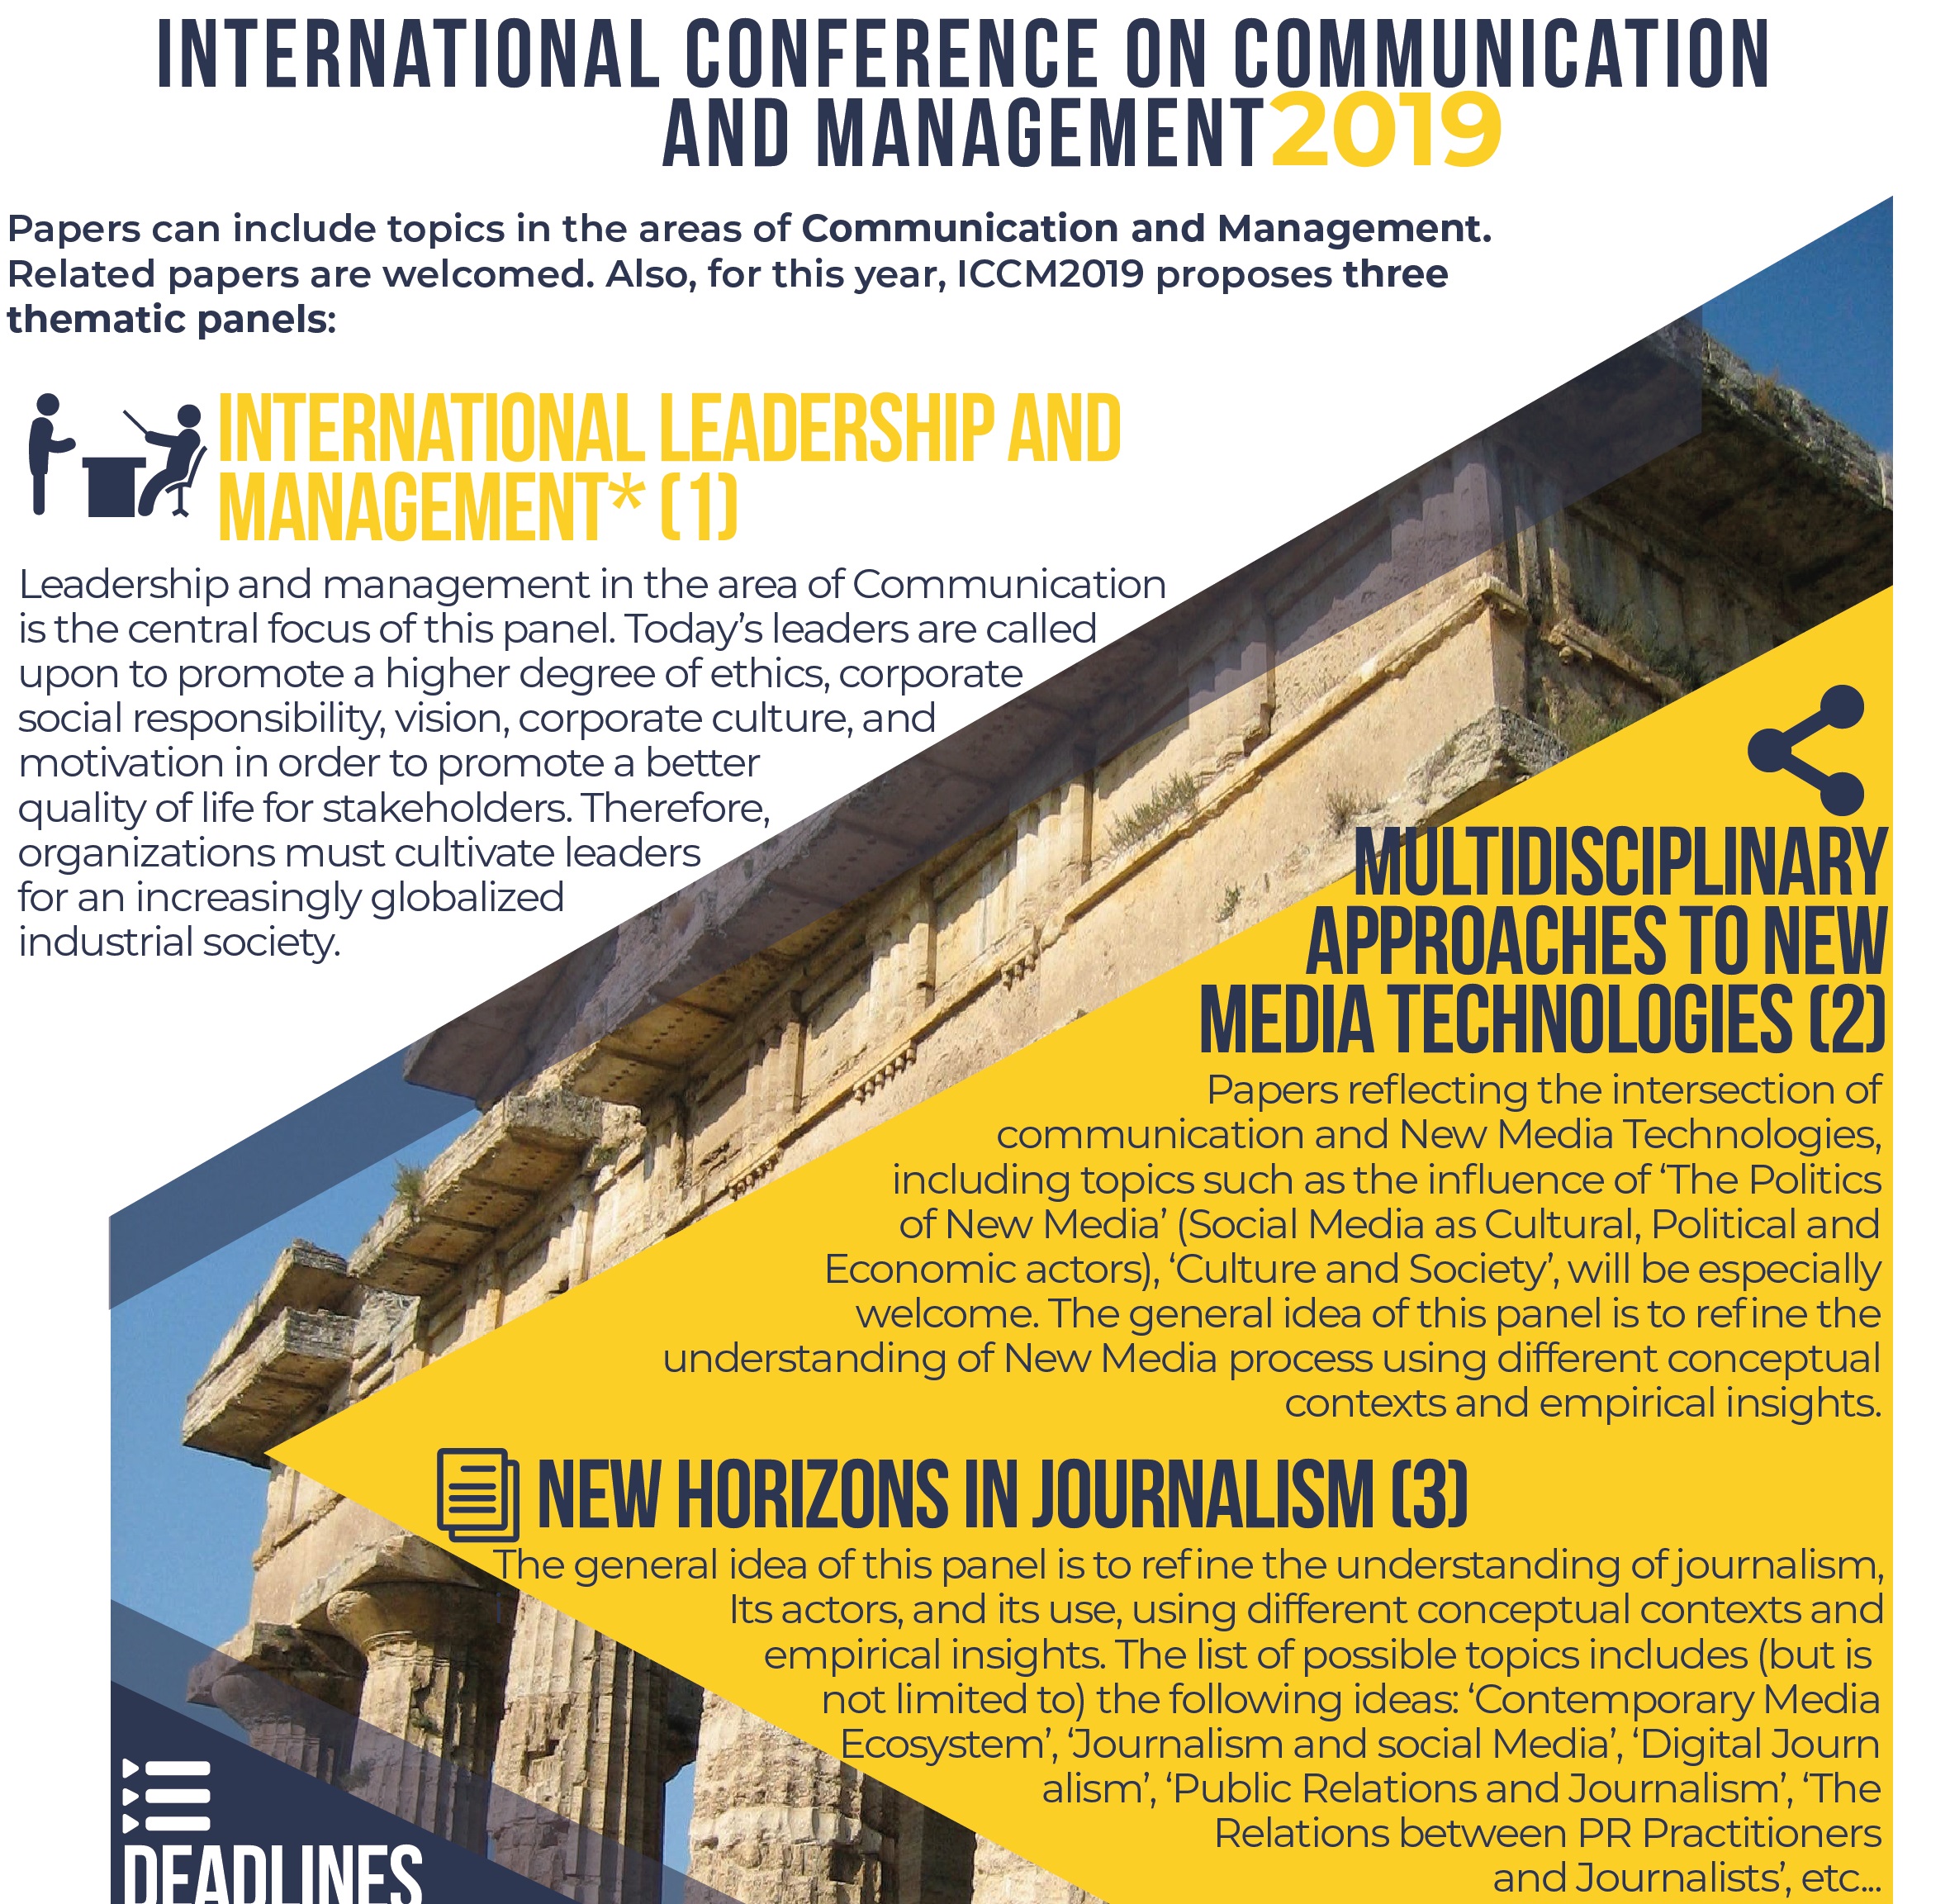 Panel on “Multidisciplinary Approaches to New Media Technologies”, Athens, Greece,Attica,Greece